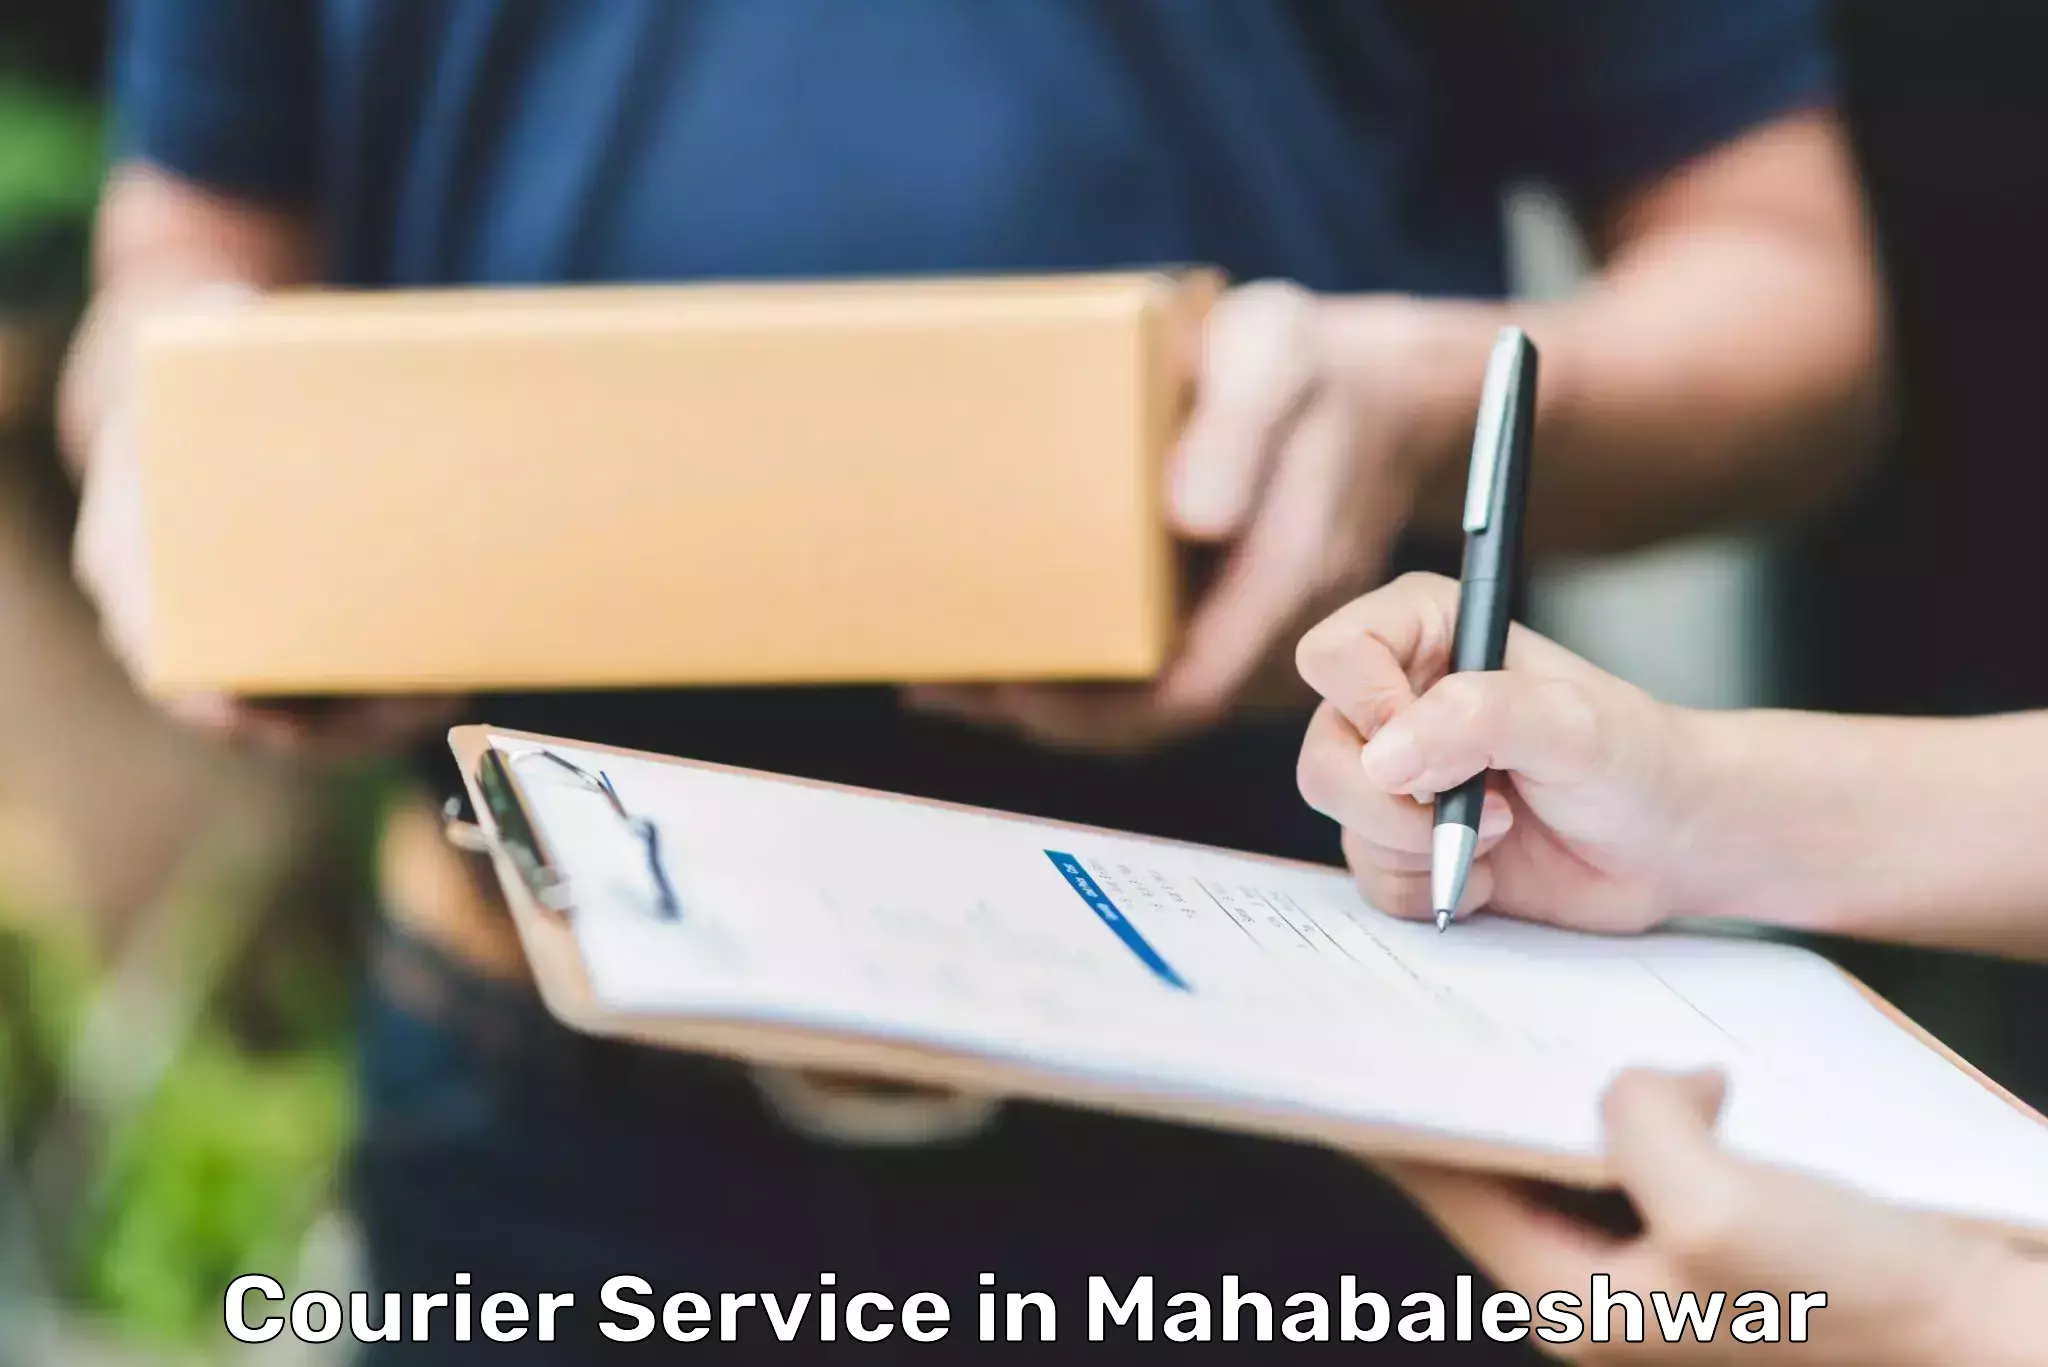 Full-service courier options in Mahabaleshwar